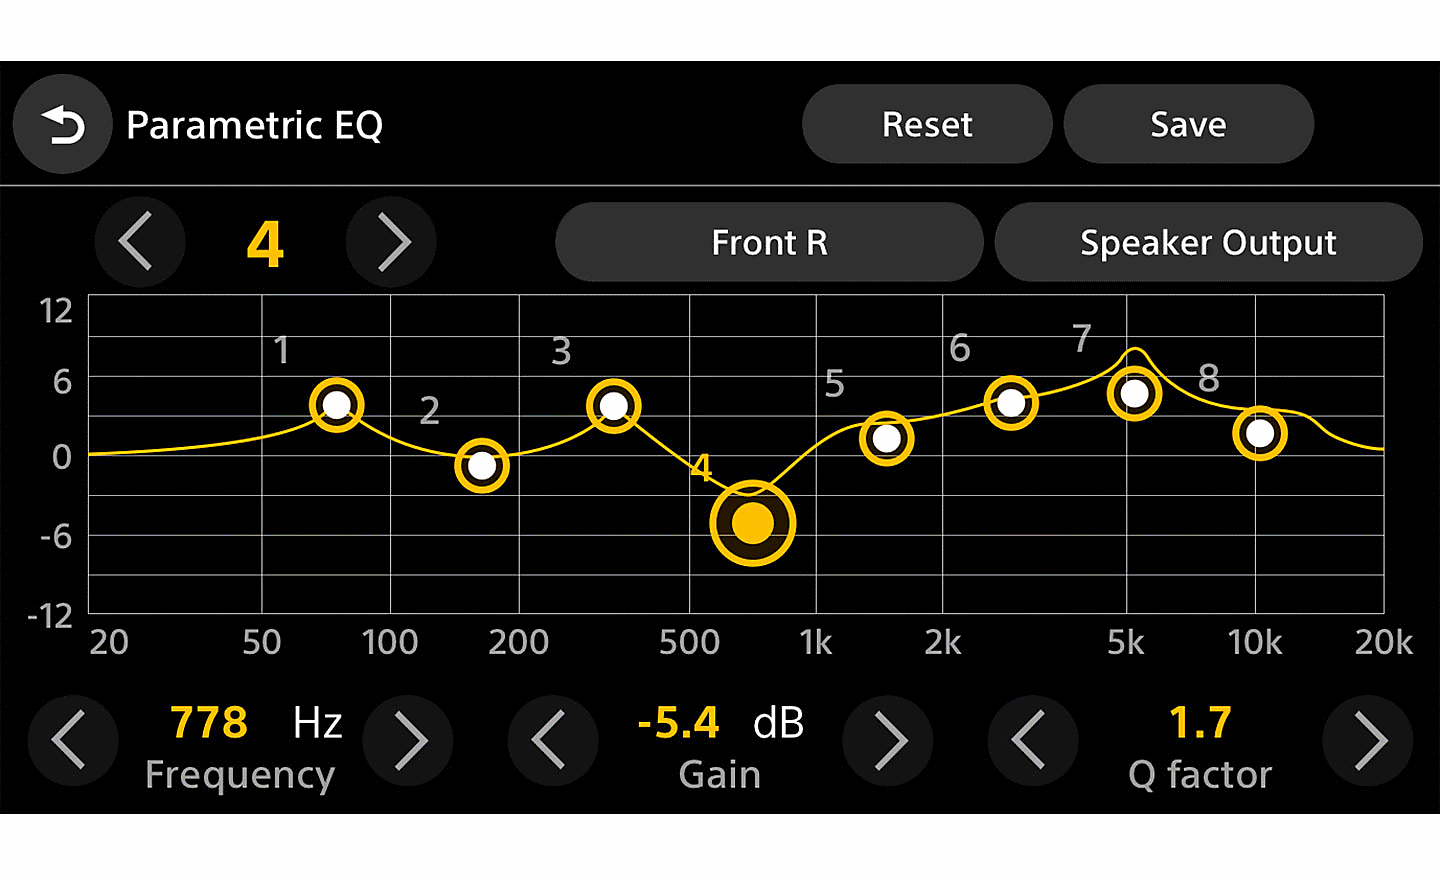 Sample user interface showing 8-band parametric EQ feature and available options.